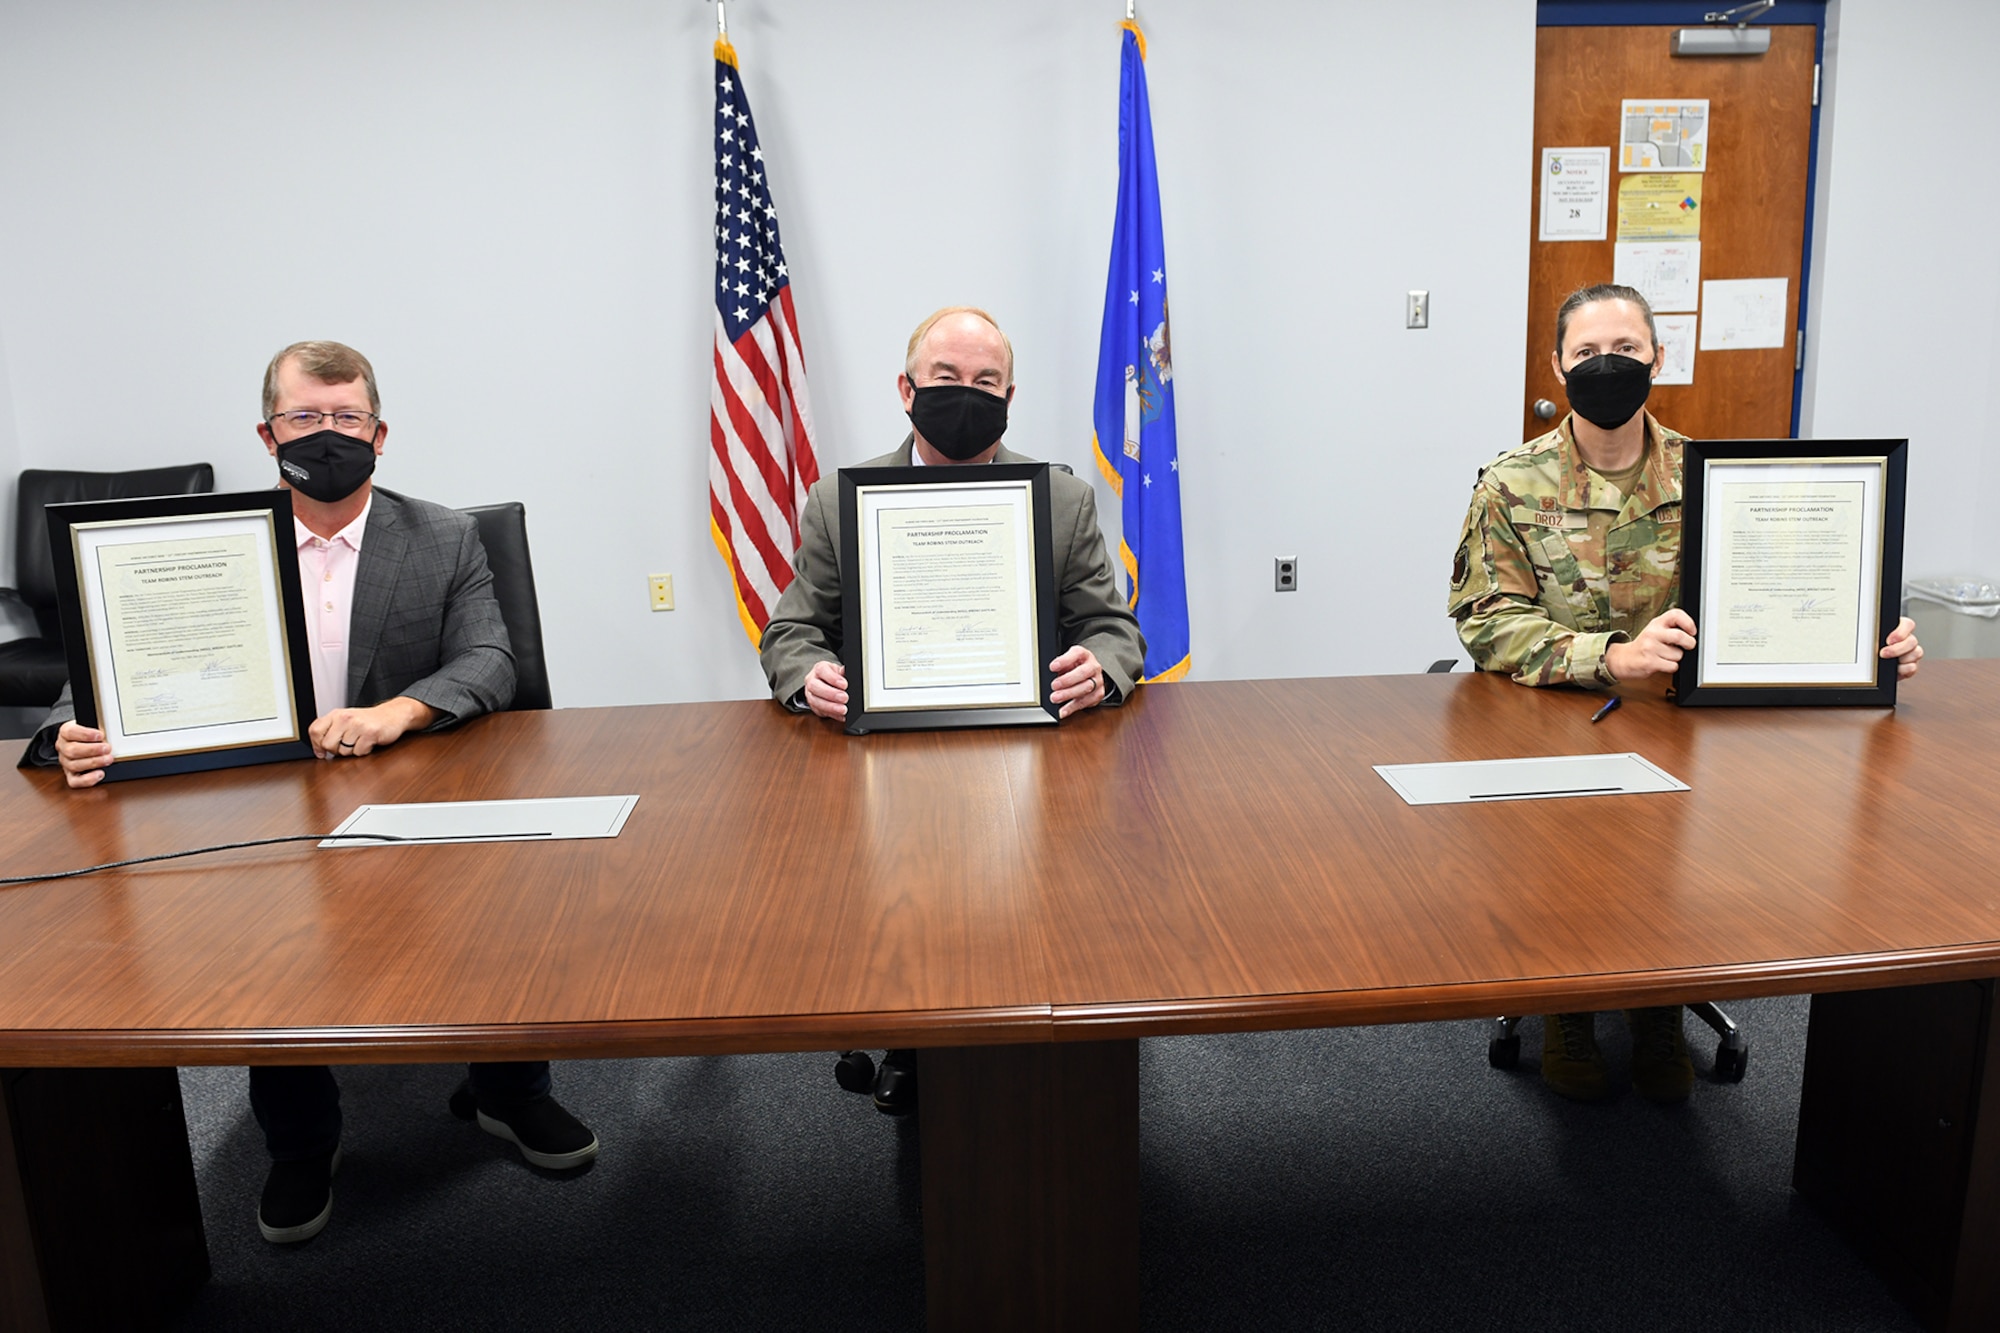 Photo shows three people sitting at table holding up papers showing signed papers.